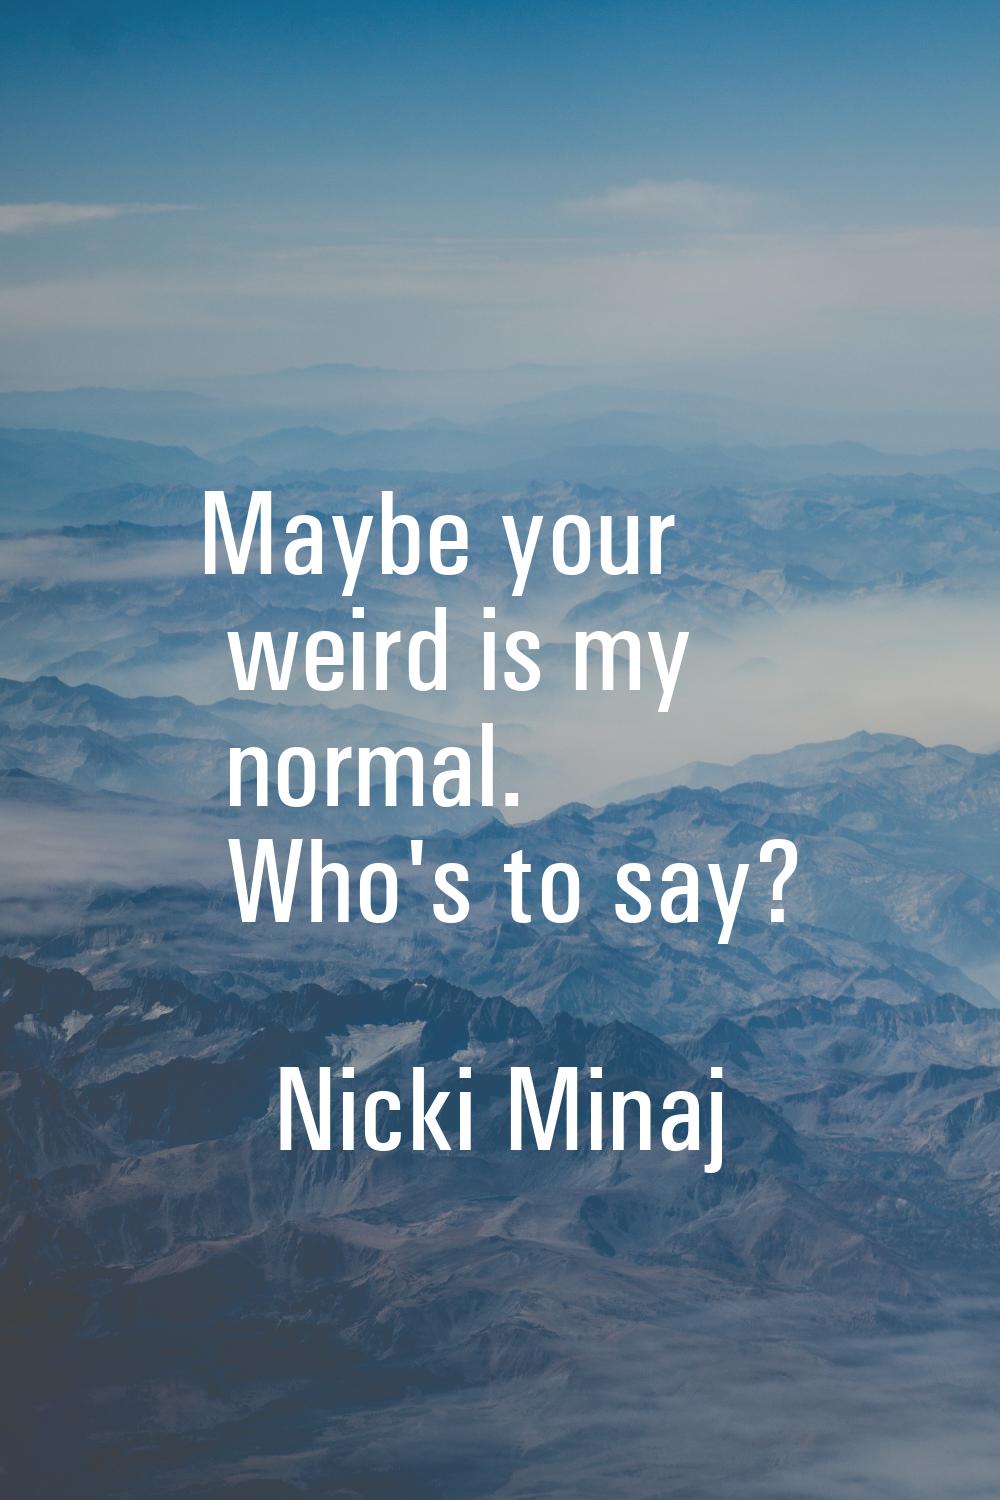 Maybe your weird is my normal. Who's to say?